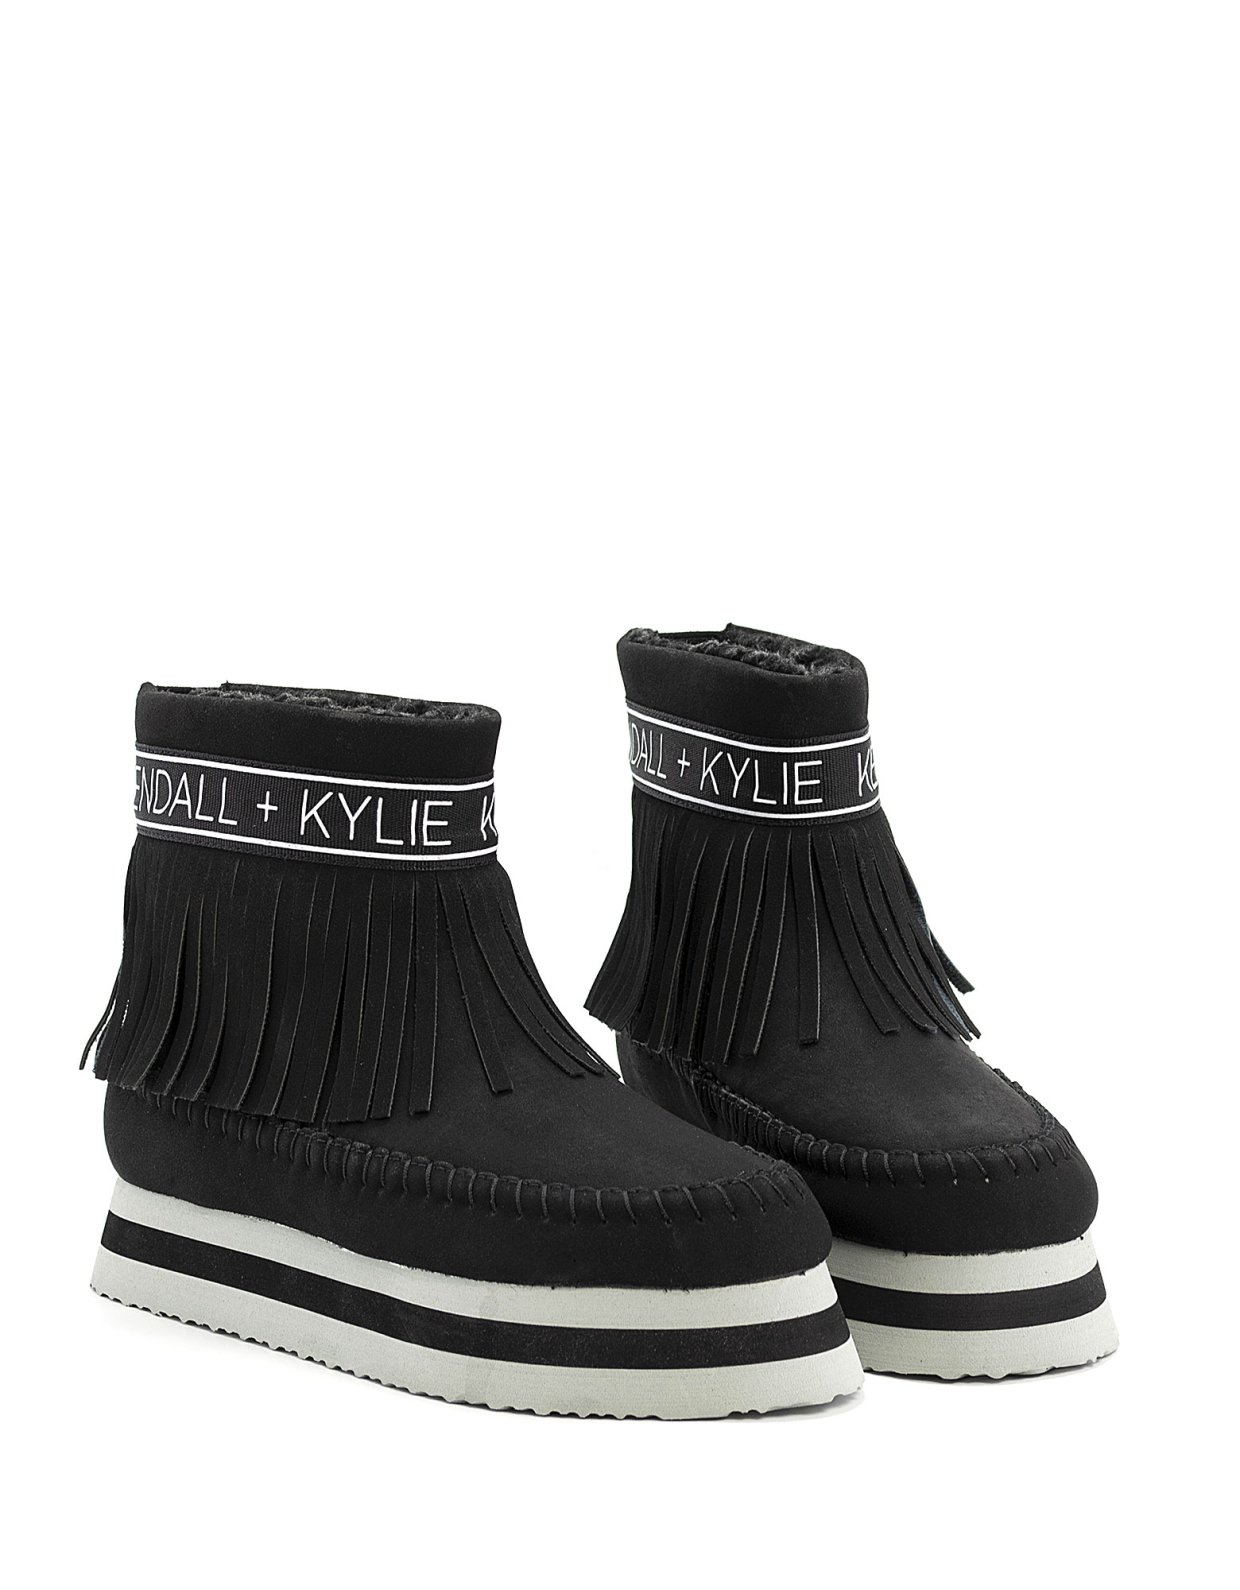 Kendall + Kylie Sirena shoes black